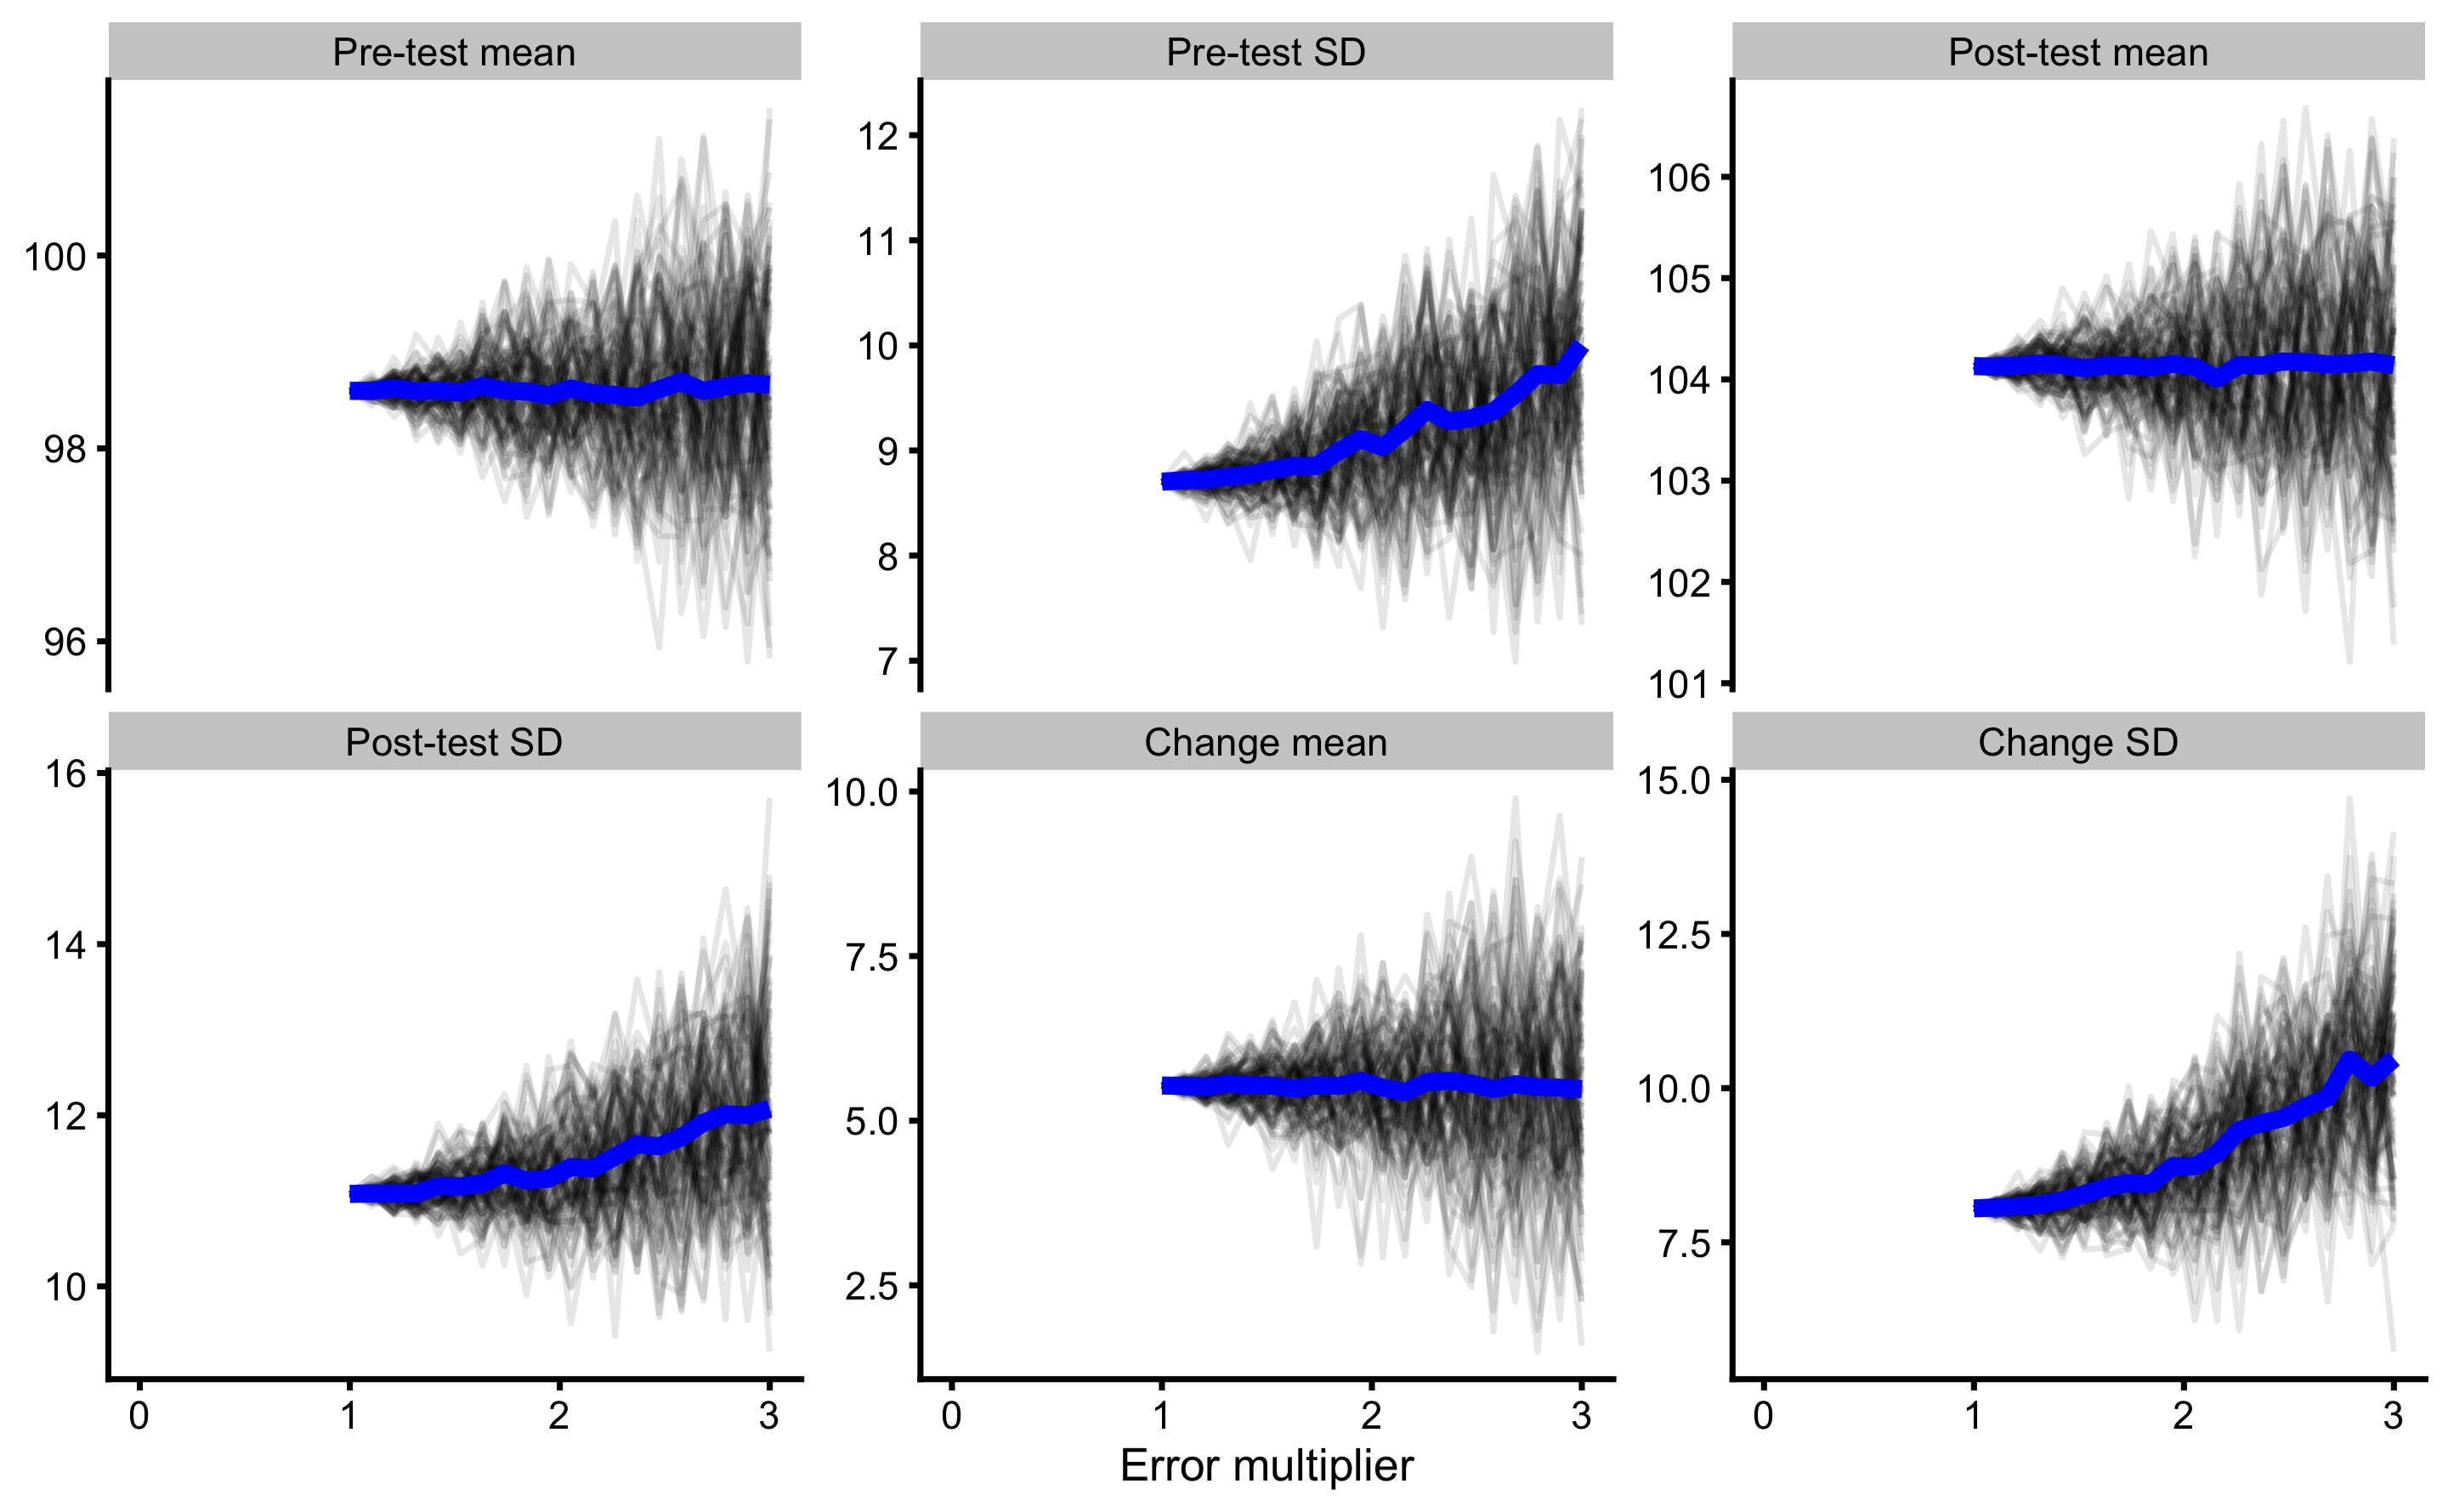 Result of SIMEX using 100 simulations and addition simulation average. Blue line represents simulations average for a particular error multiplier